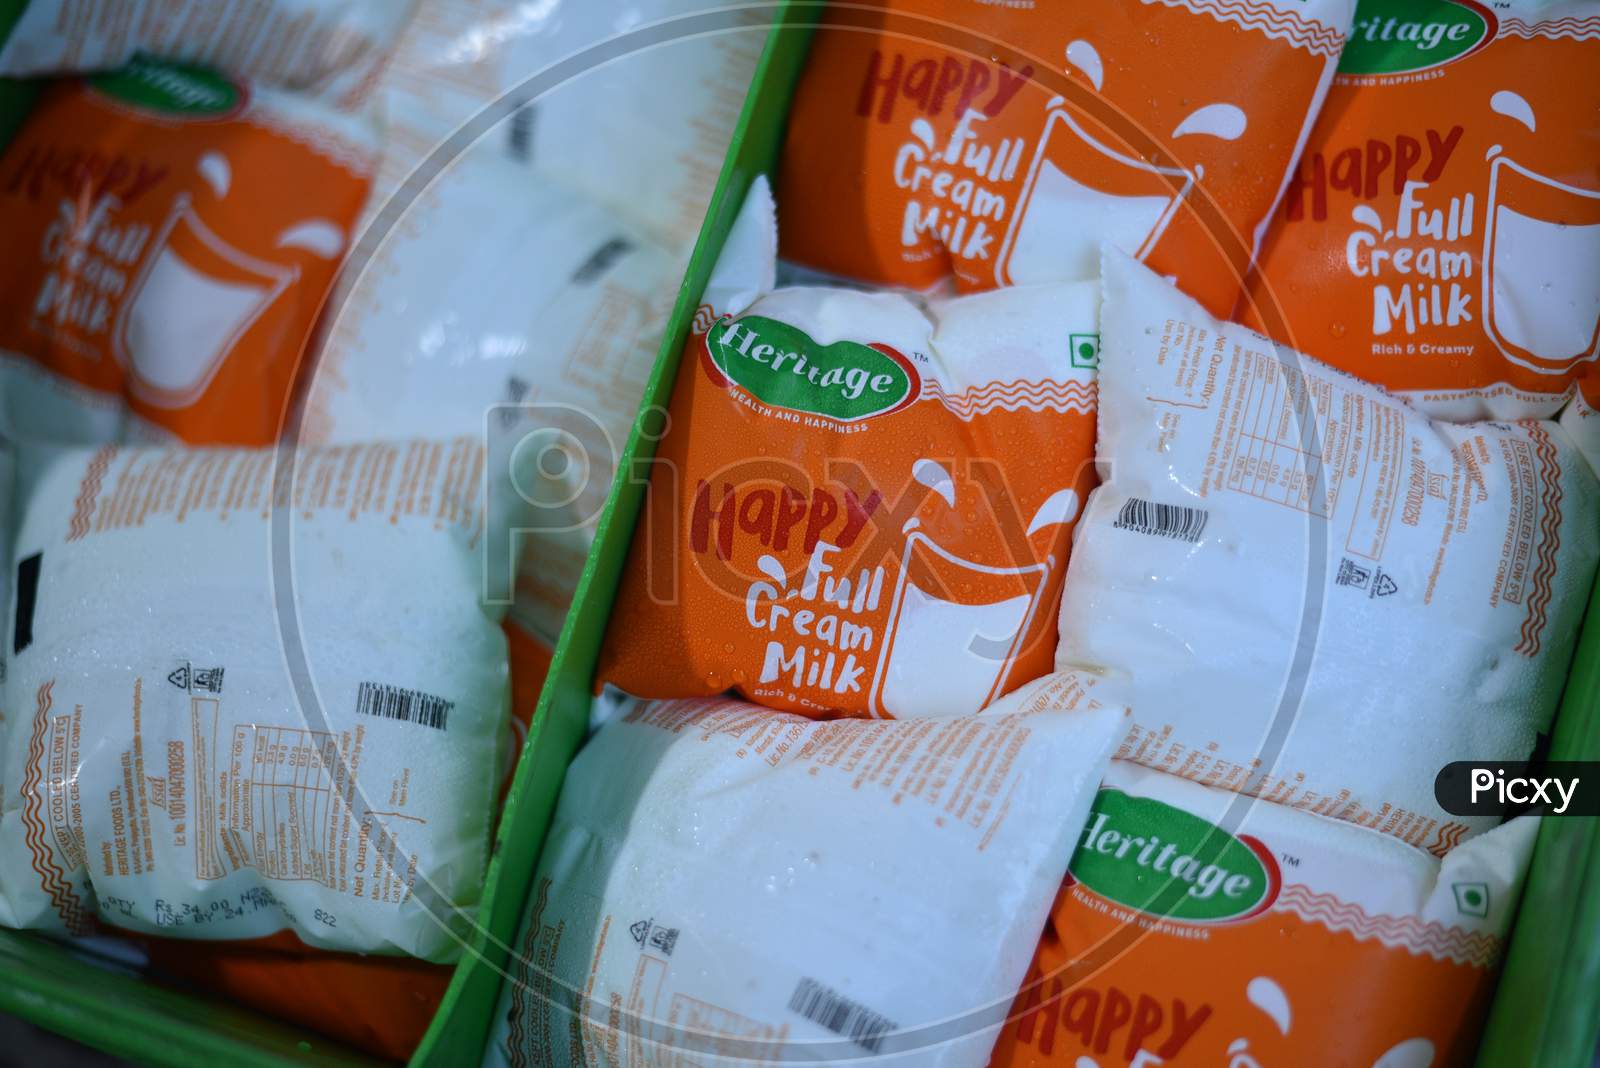 Daily essentials like milk and other groceries shops are open during the lockdown in Telangana amidst outbreak of COVID19, Corona Virus Pandemic